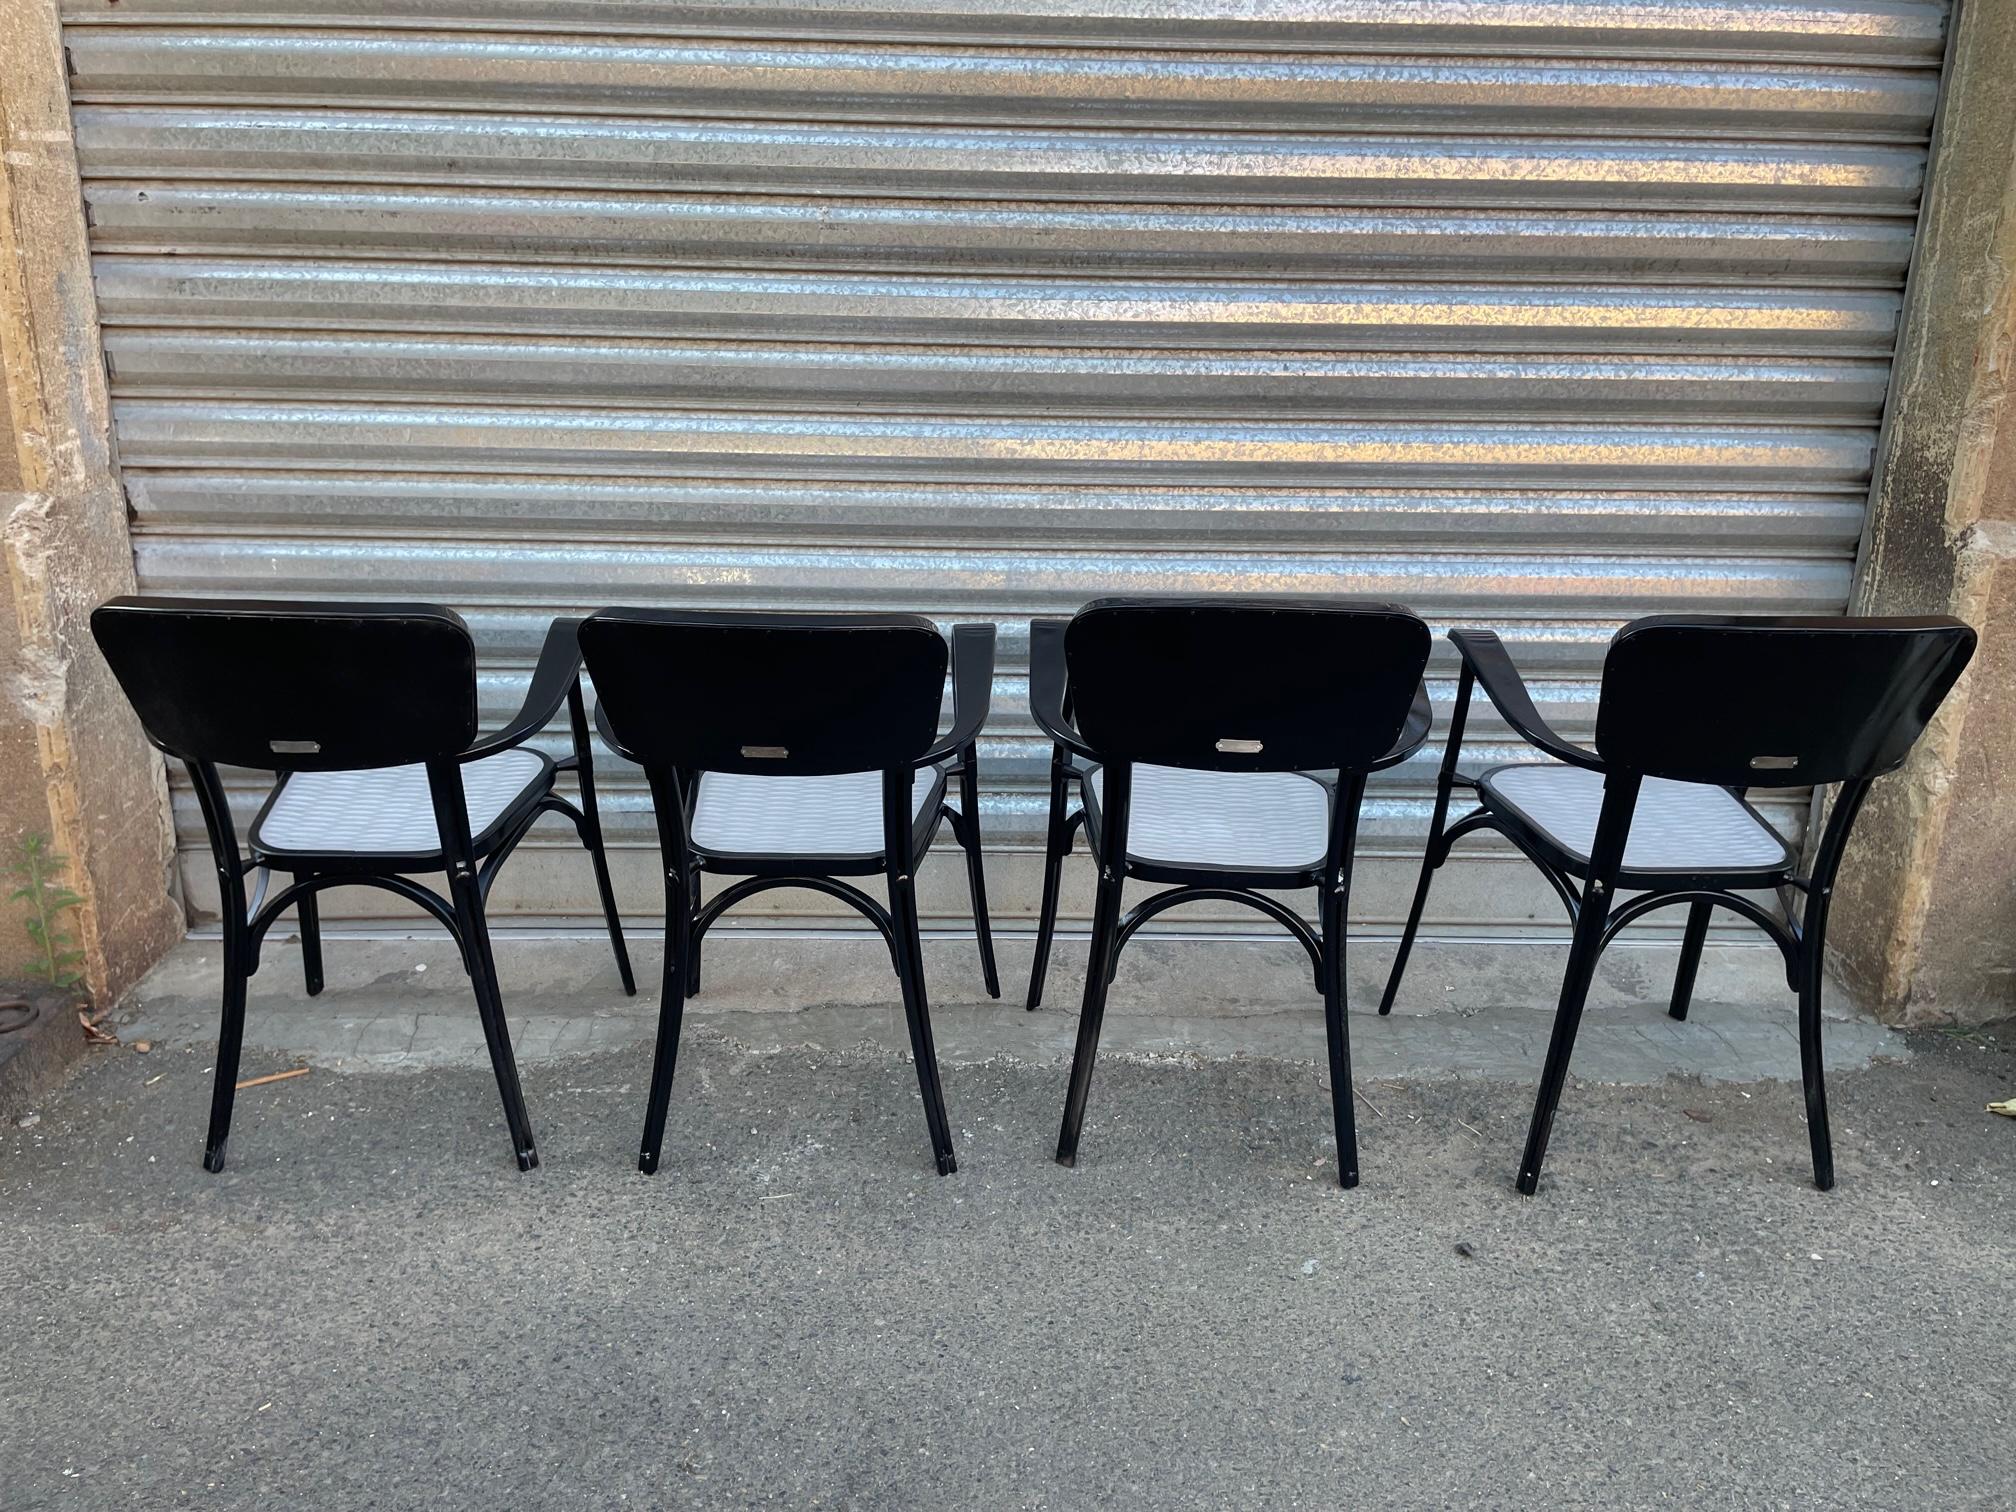 20th Century French Set of Four Gaston Viort Aluminum Chairs, 1950s For Sale 1